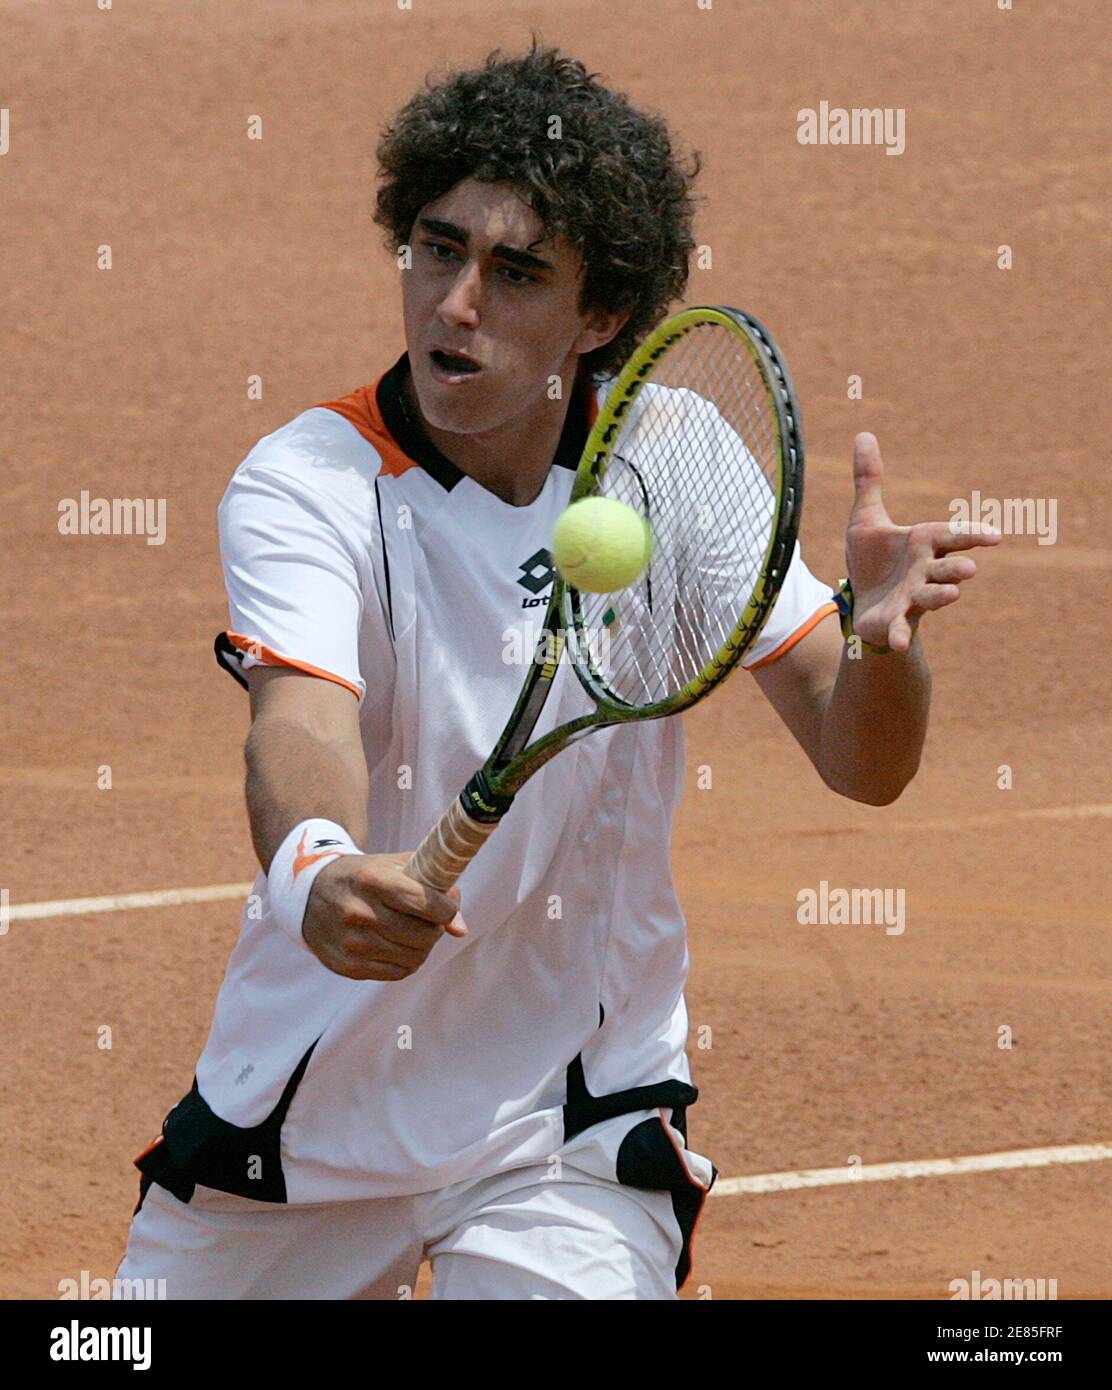 Argentina's Facundo Arguello hits a return to compatriot Agustin Velotti in  their Tennis final match at the South American Games in Medellin March 28,  2010. REUTERS/Albeiro Lopera (COLOMBIA - Tags: SPORT TENNIS